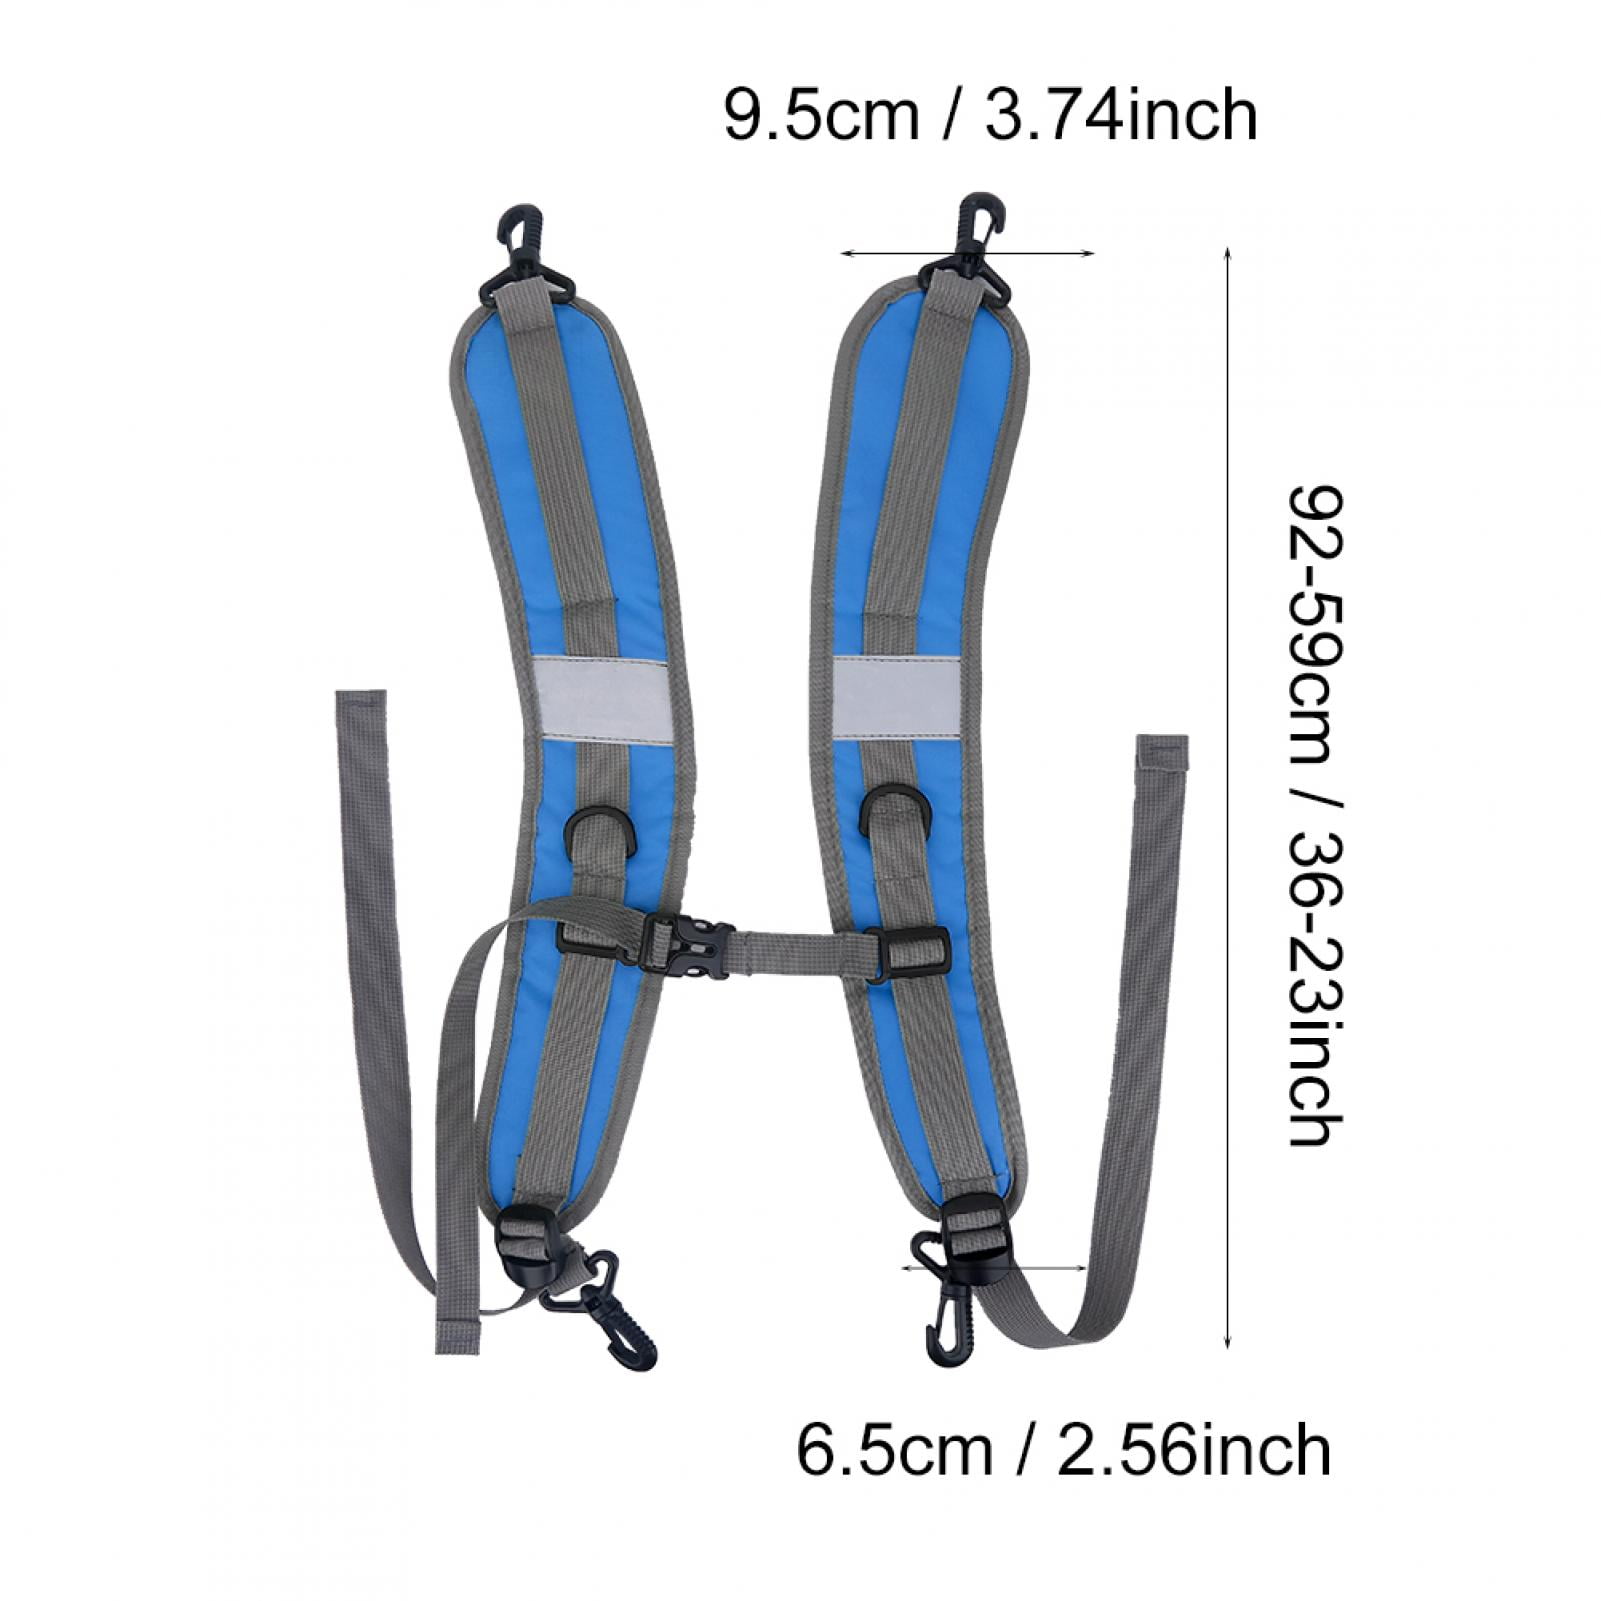 Outdoor Sports Backpack Straps Replacement Strap Adjustable Travel Bag Parts 